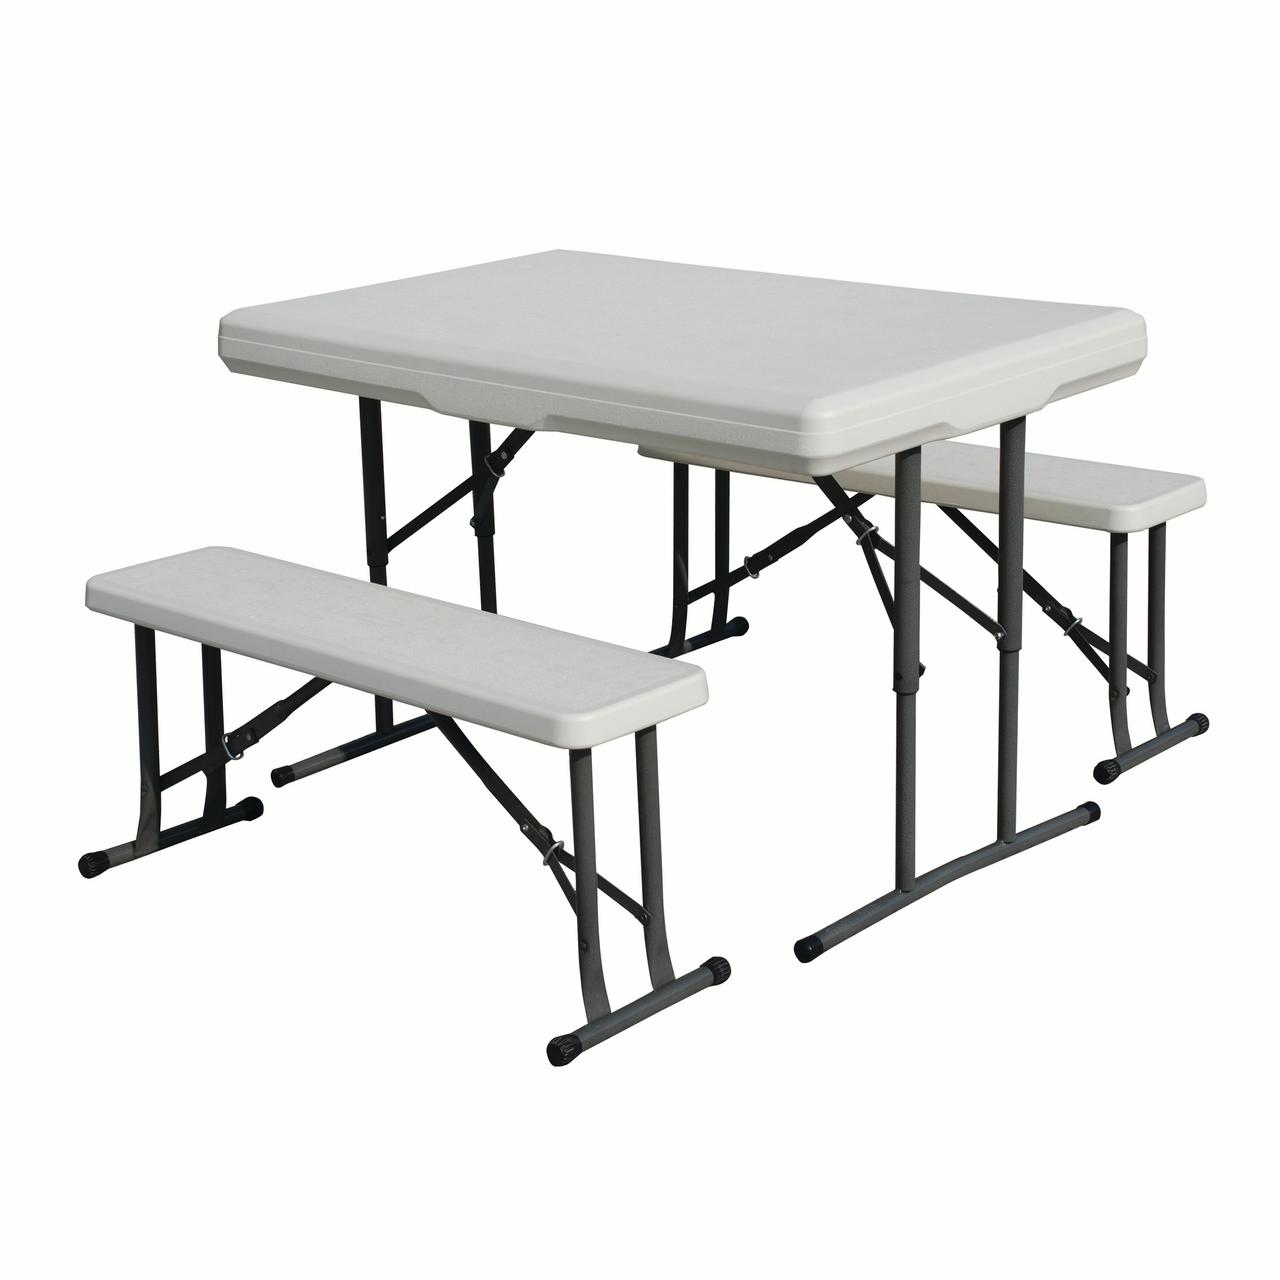 Stansport Folding Table With Bench Seats